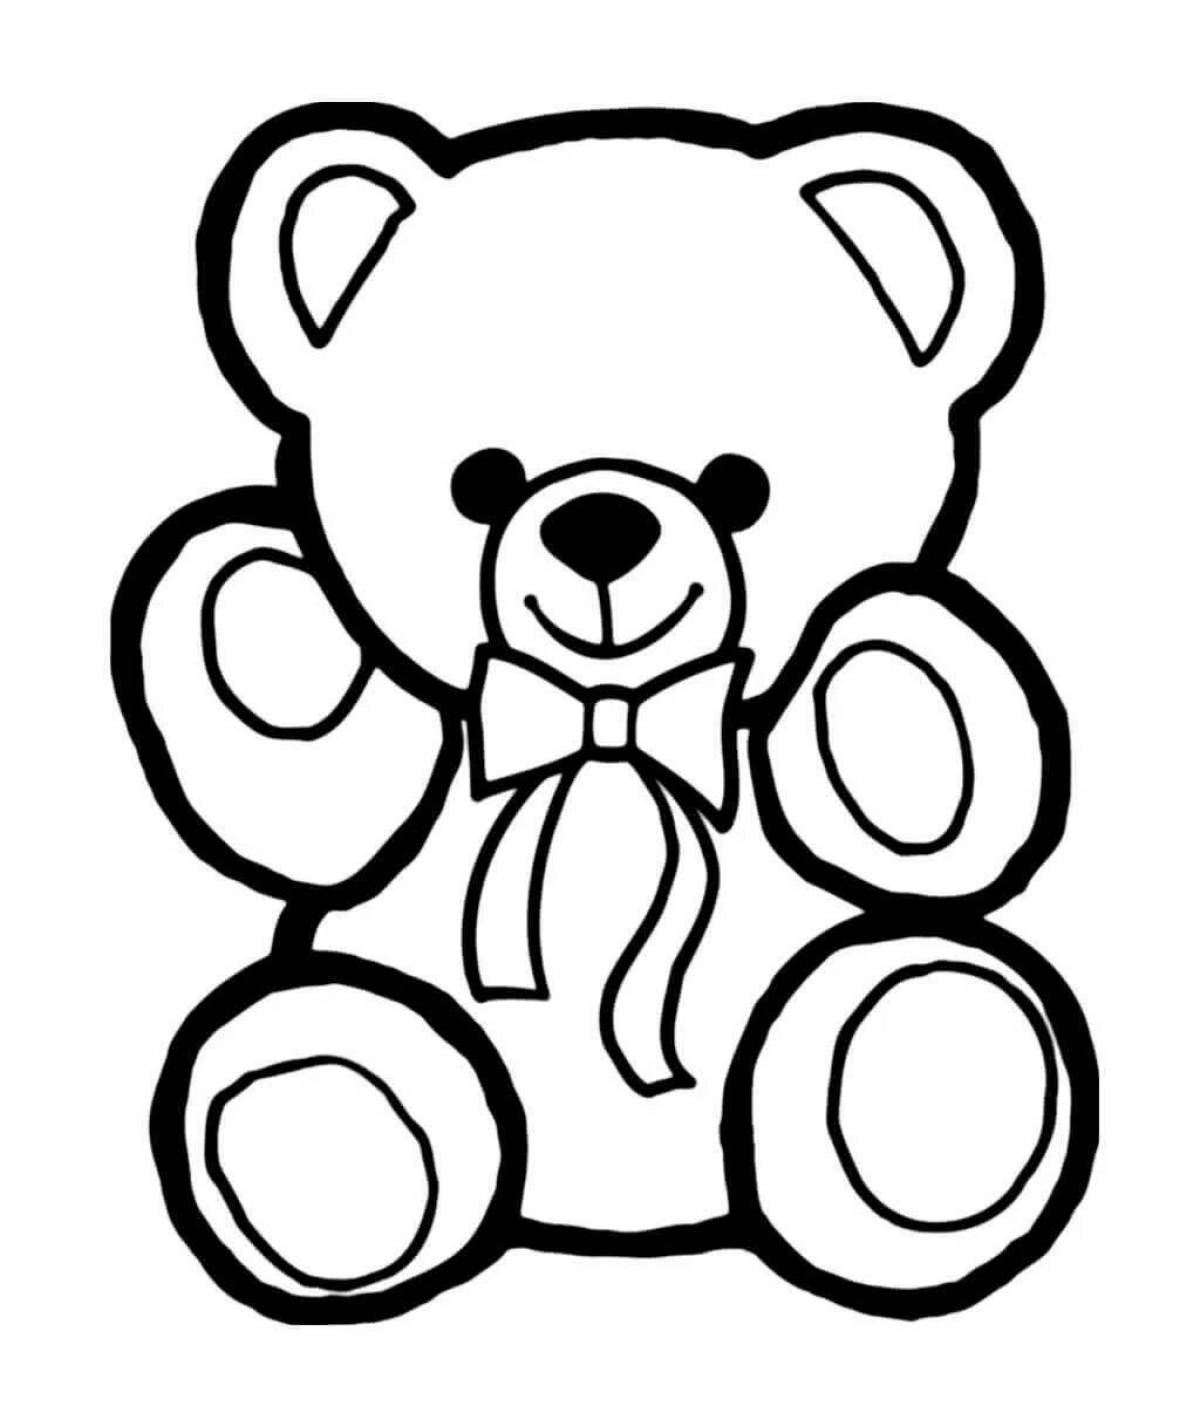 Creative coloring bear for children 4-5 years old